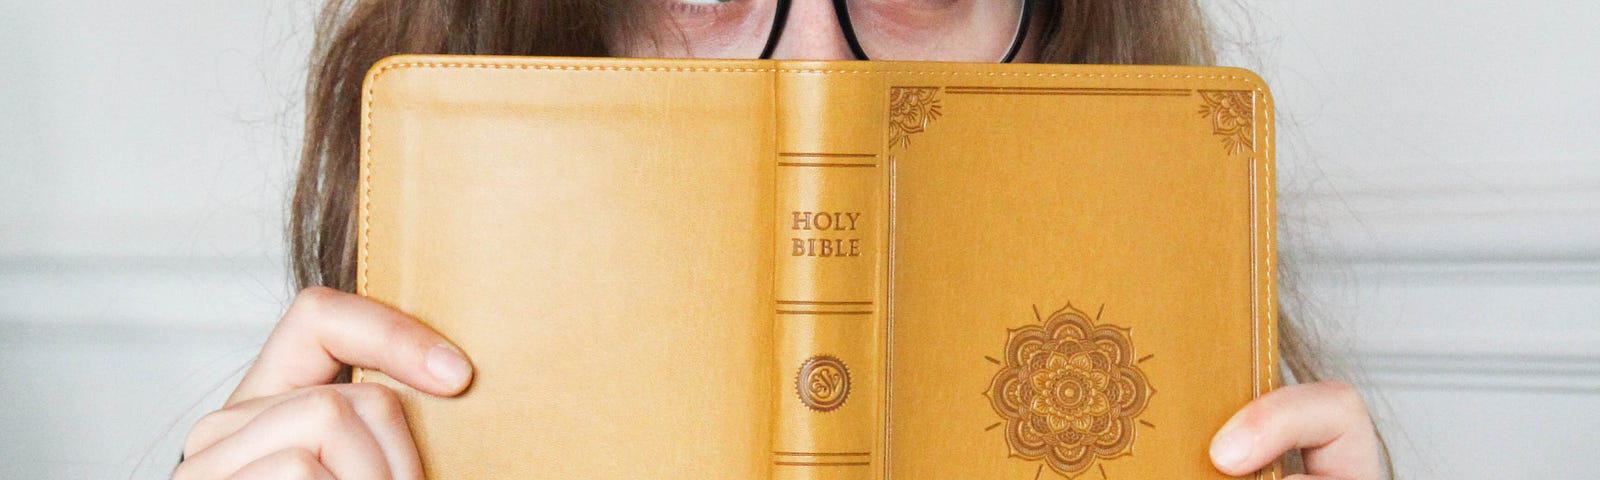 A young woman peers at something from behind a Bible.